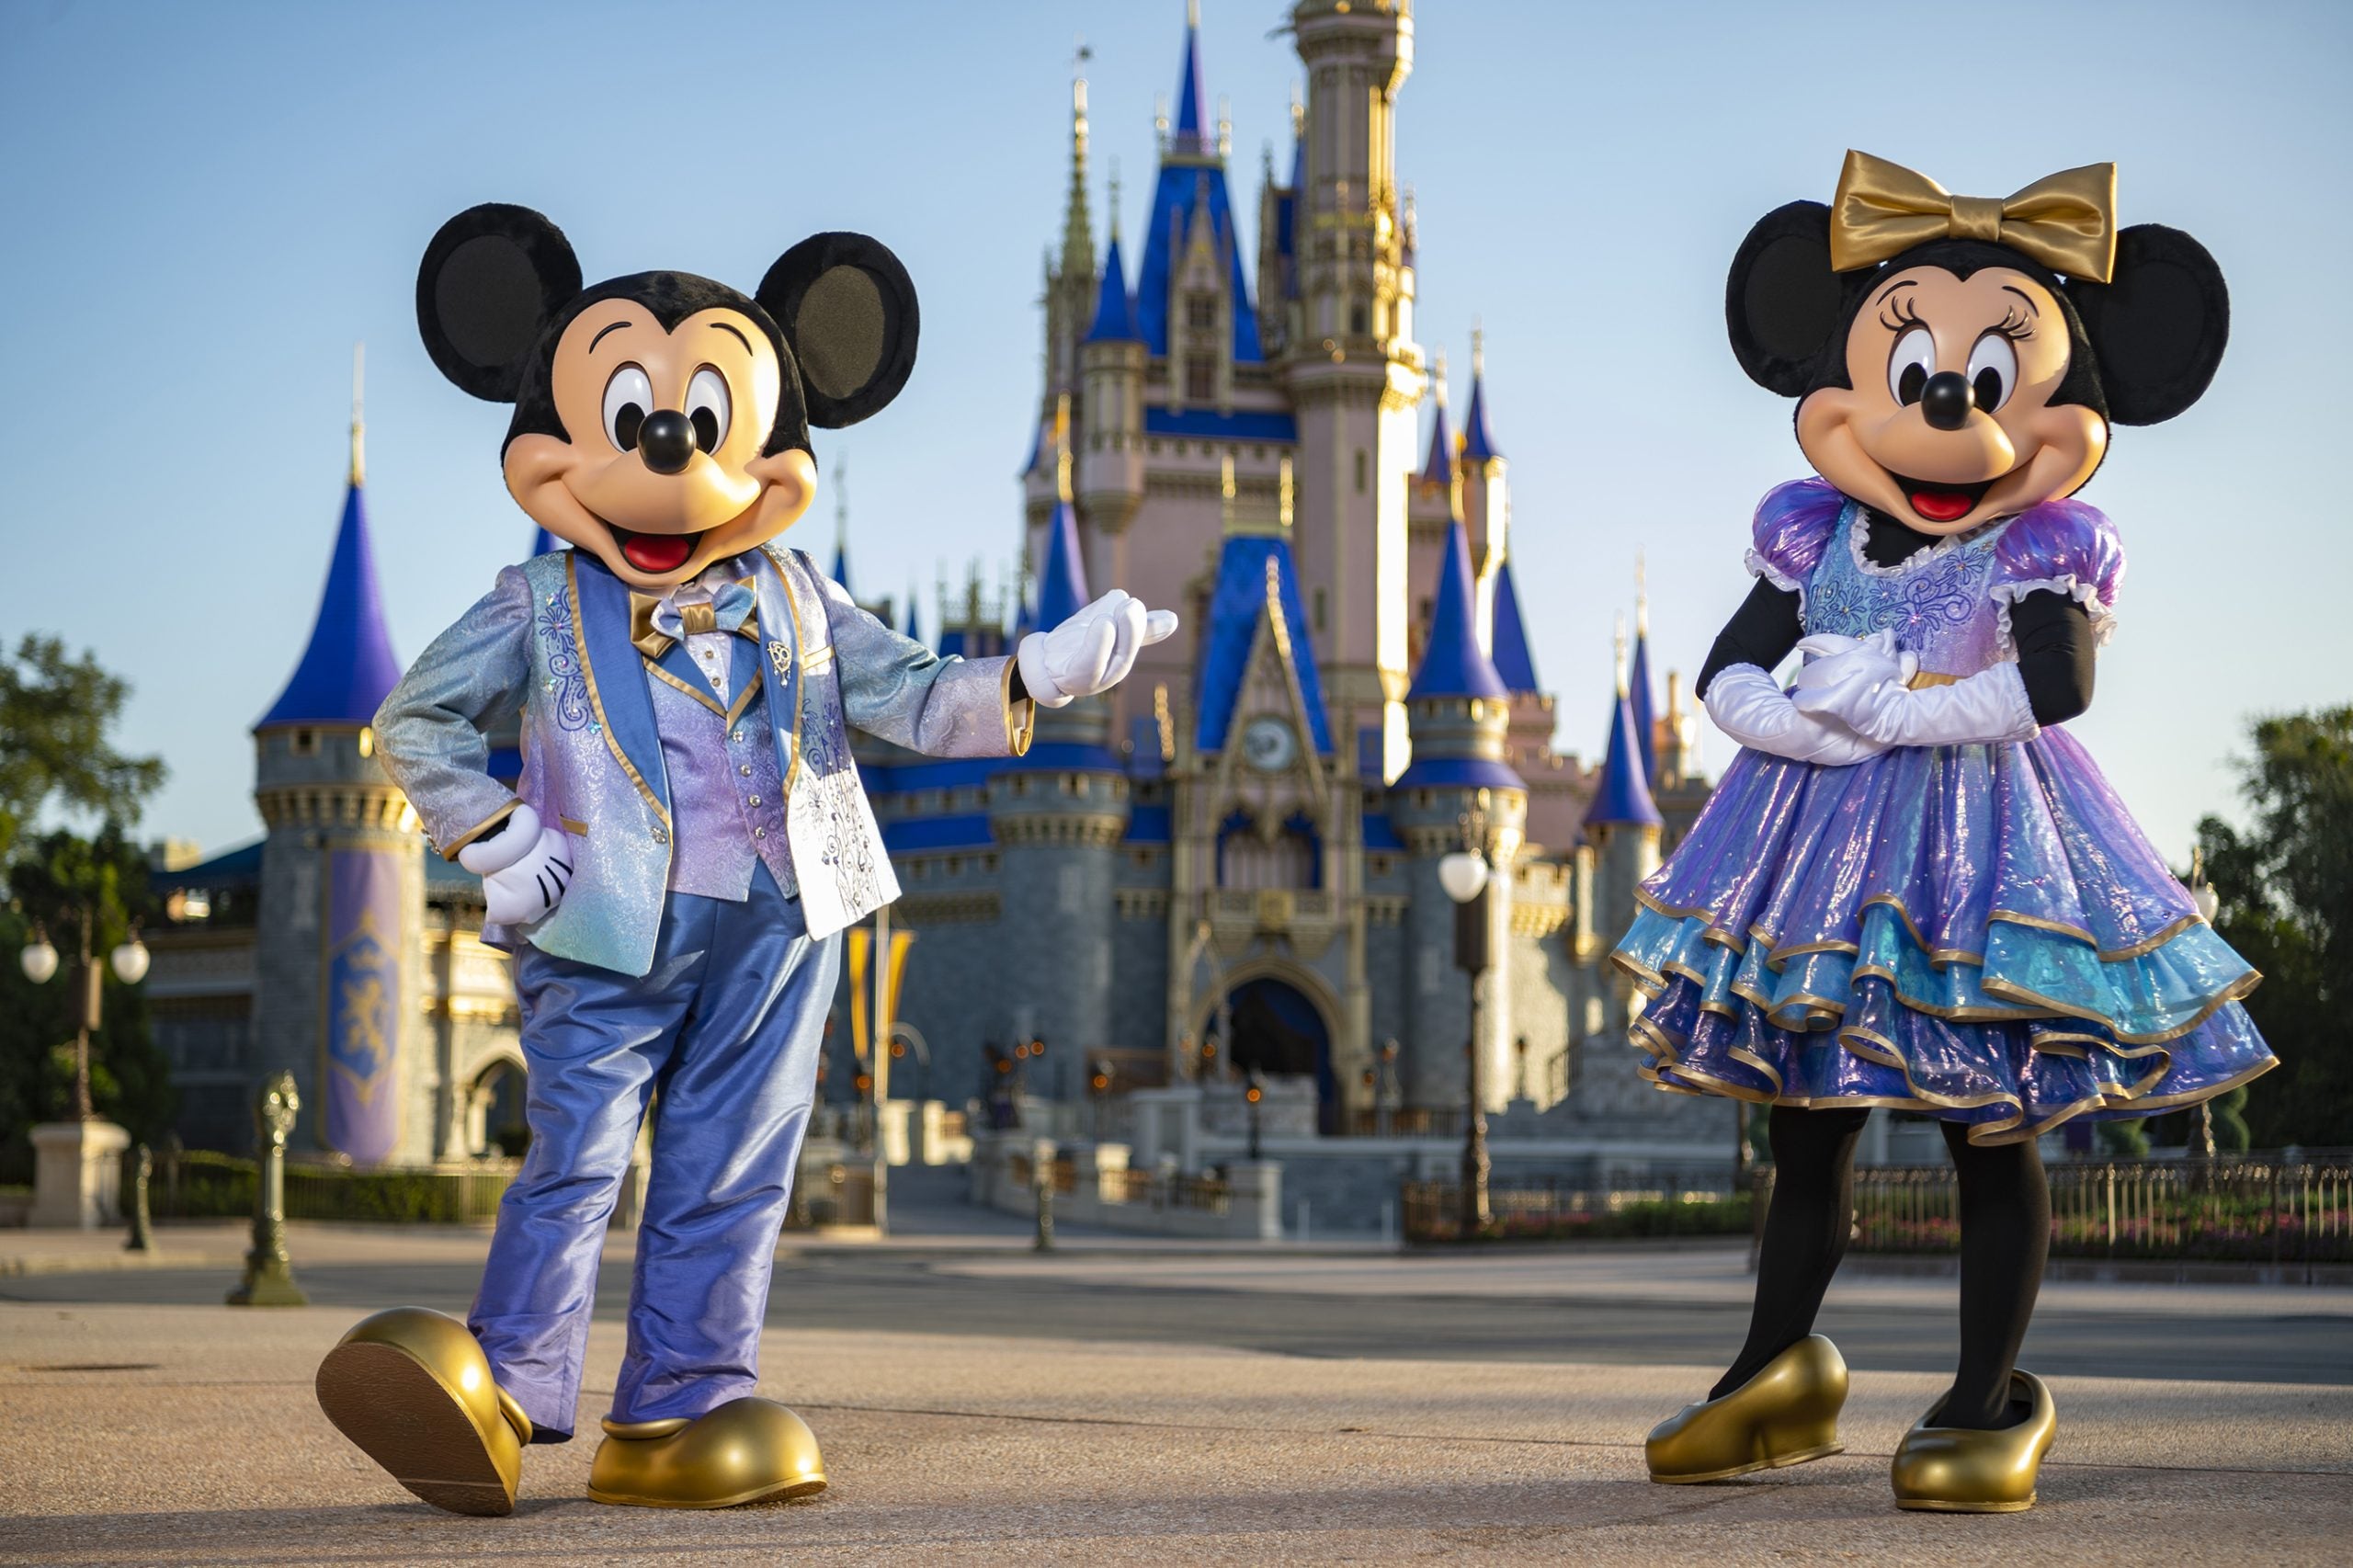 All Of The Fun New Ways To Enjoy A Family Visit To Disney World’s 50th Anniversary Celebration